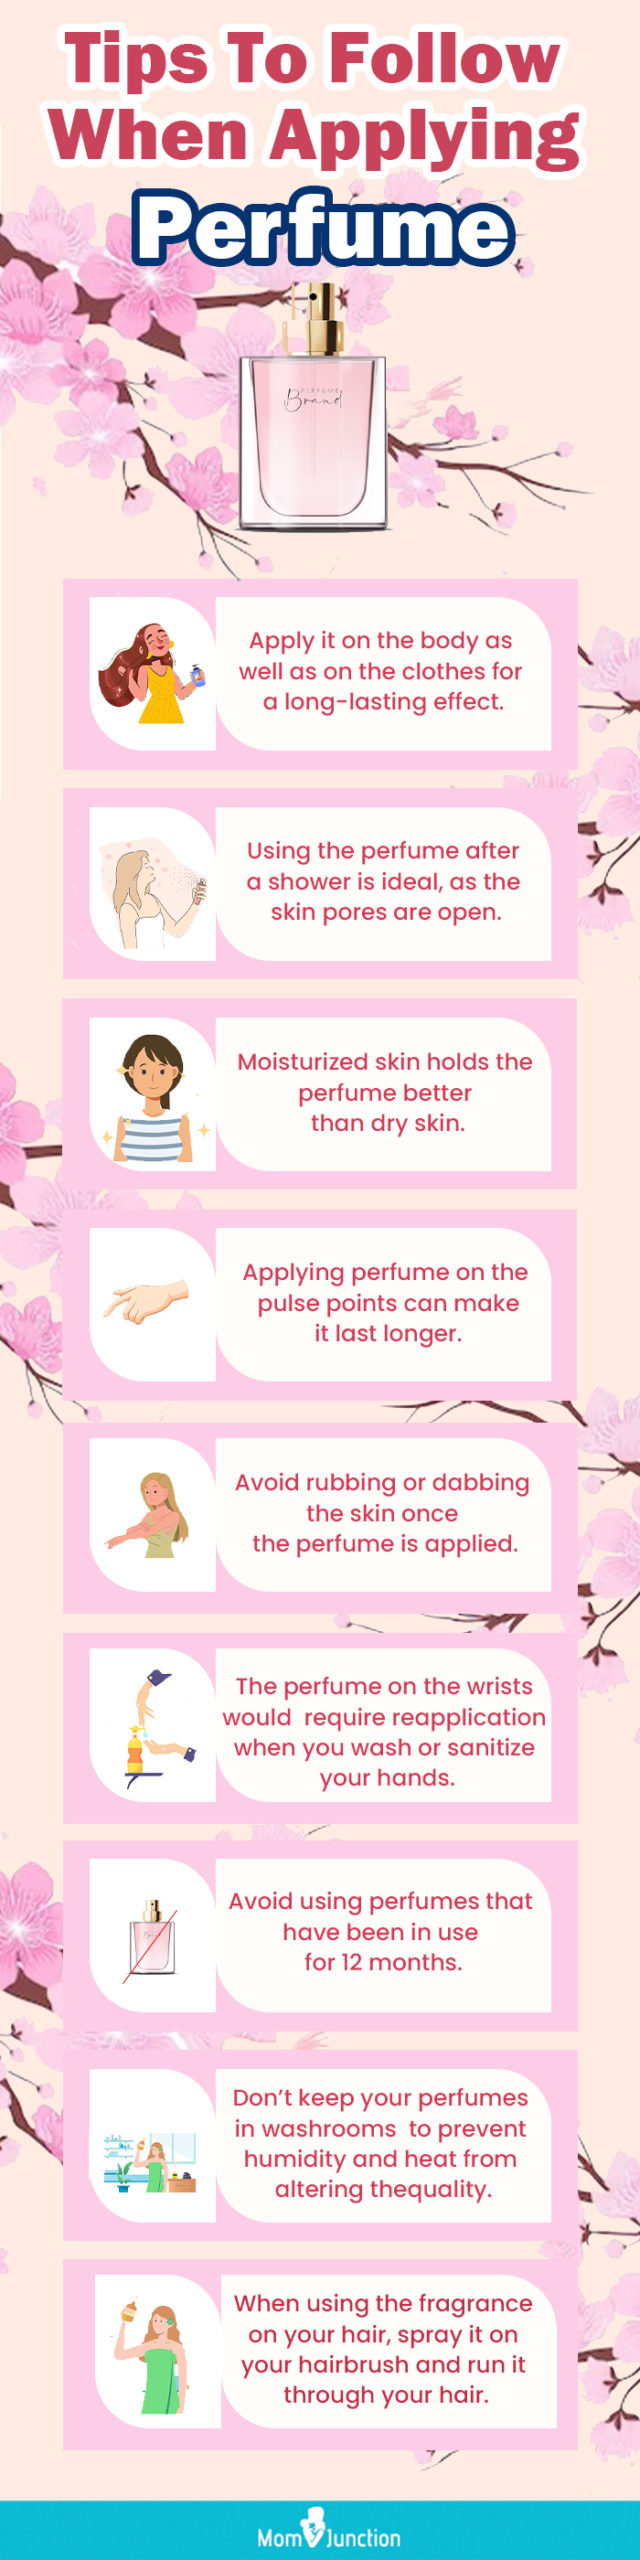 Tips To Follow When Applying Perfume (infographic)